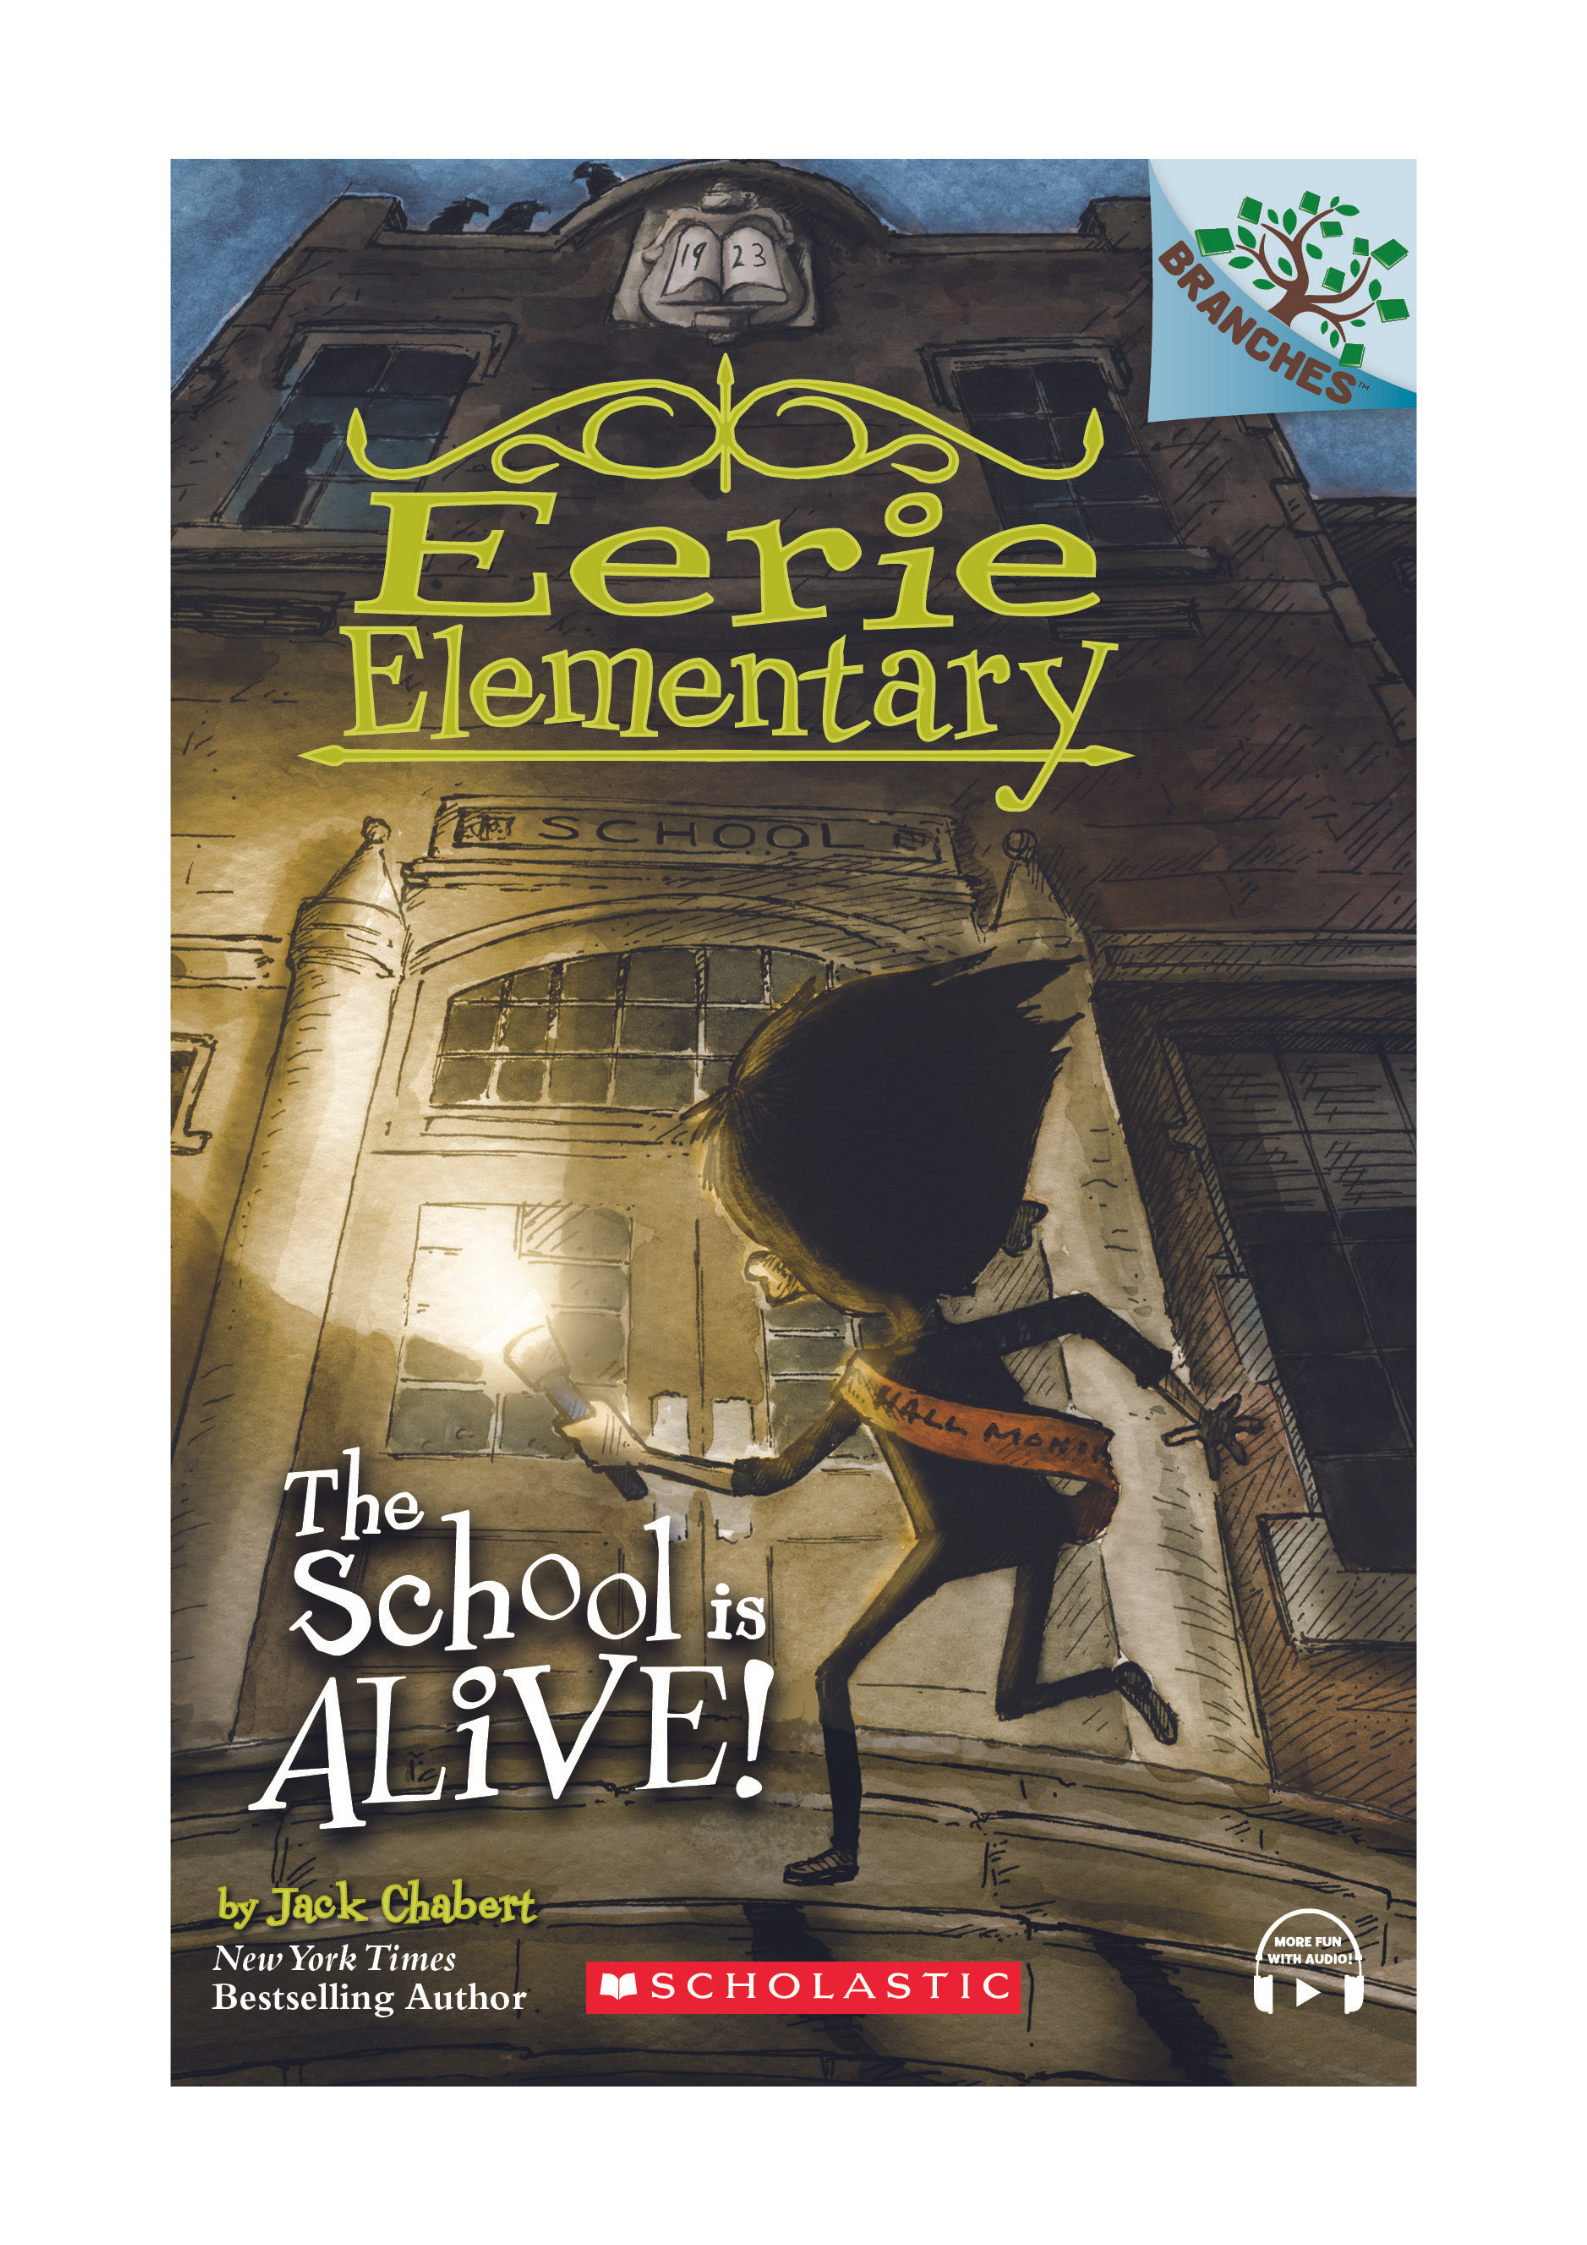 Branches – Eerie Elementary #1: The School is Alive!